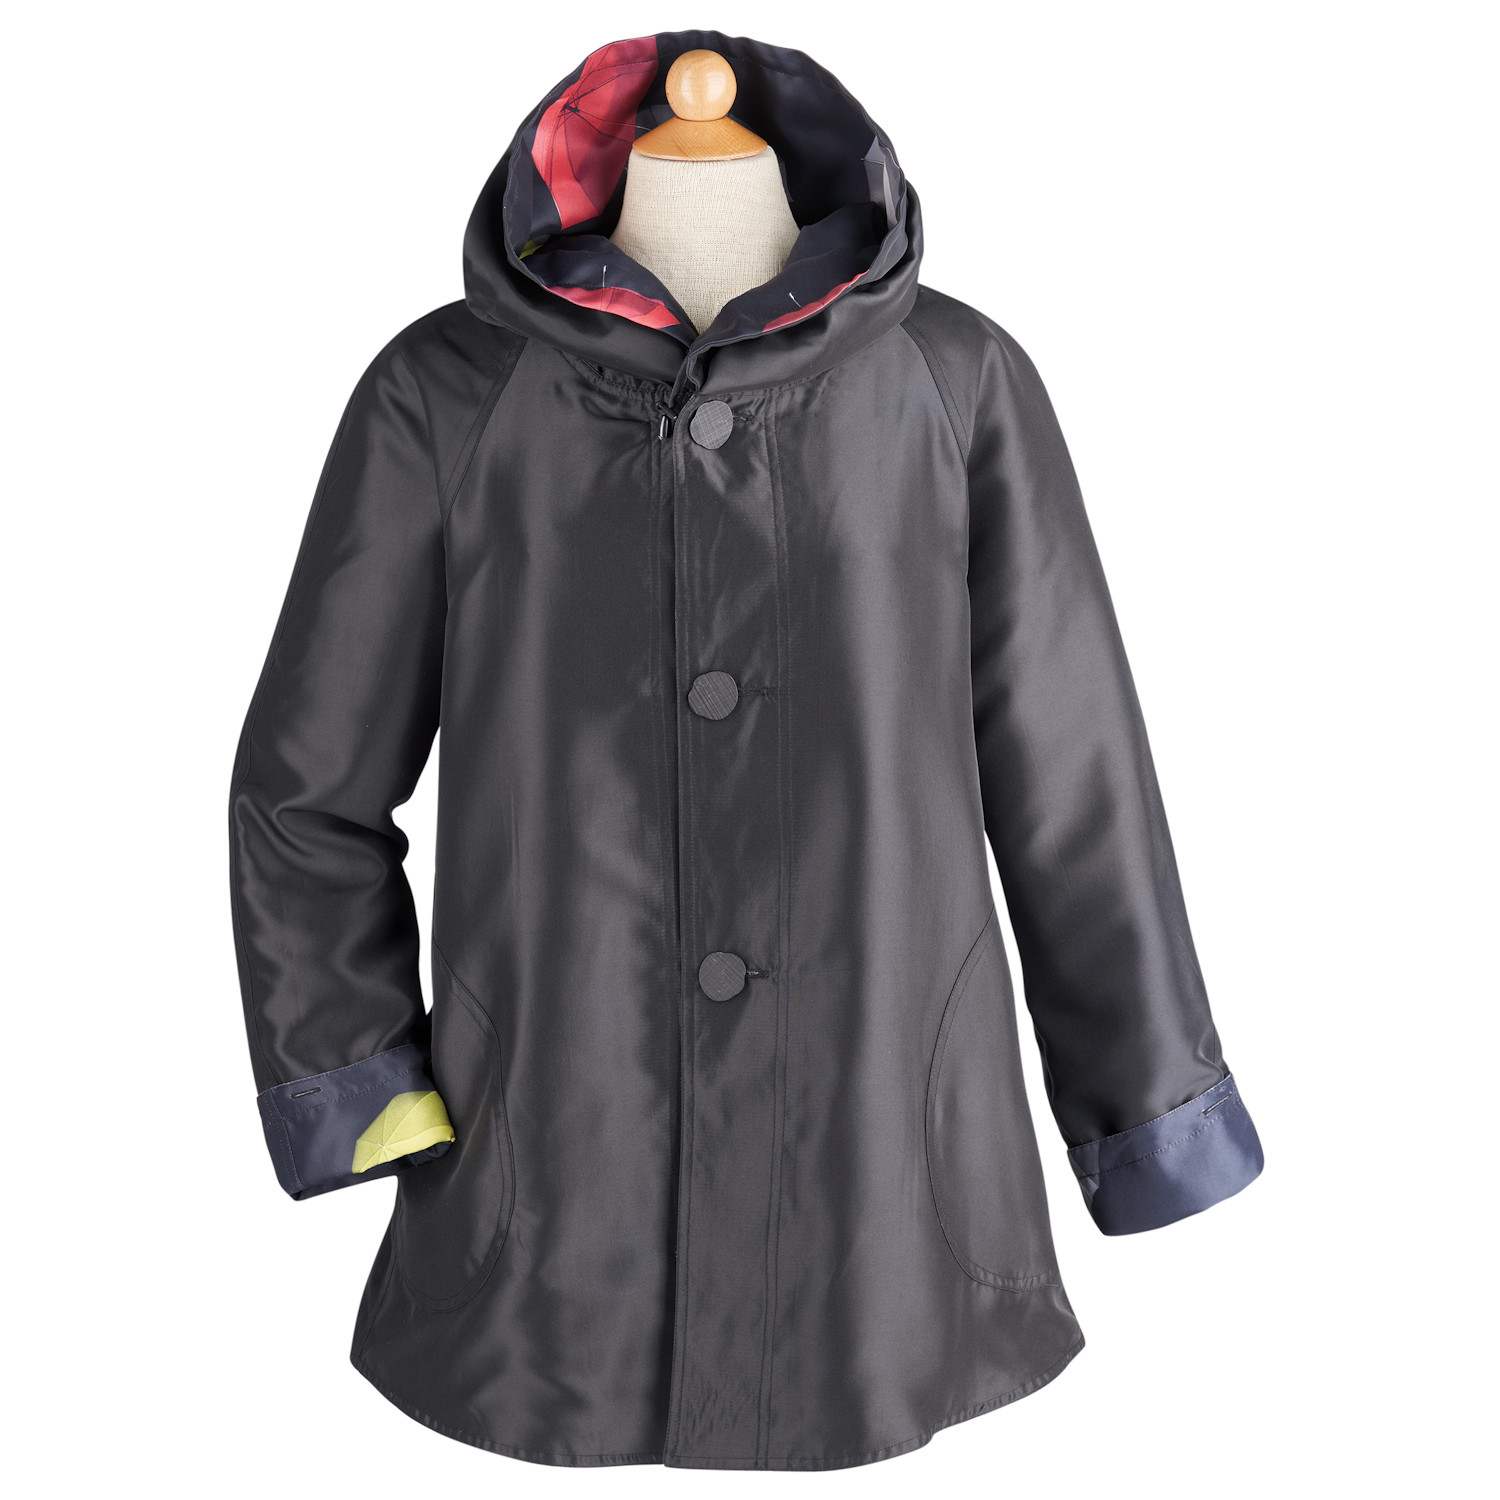 Stay Dry and Adventure On: Why a Raincoat is a Must-Have for Your ...